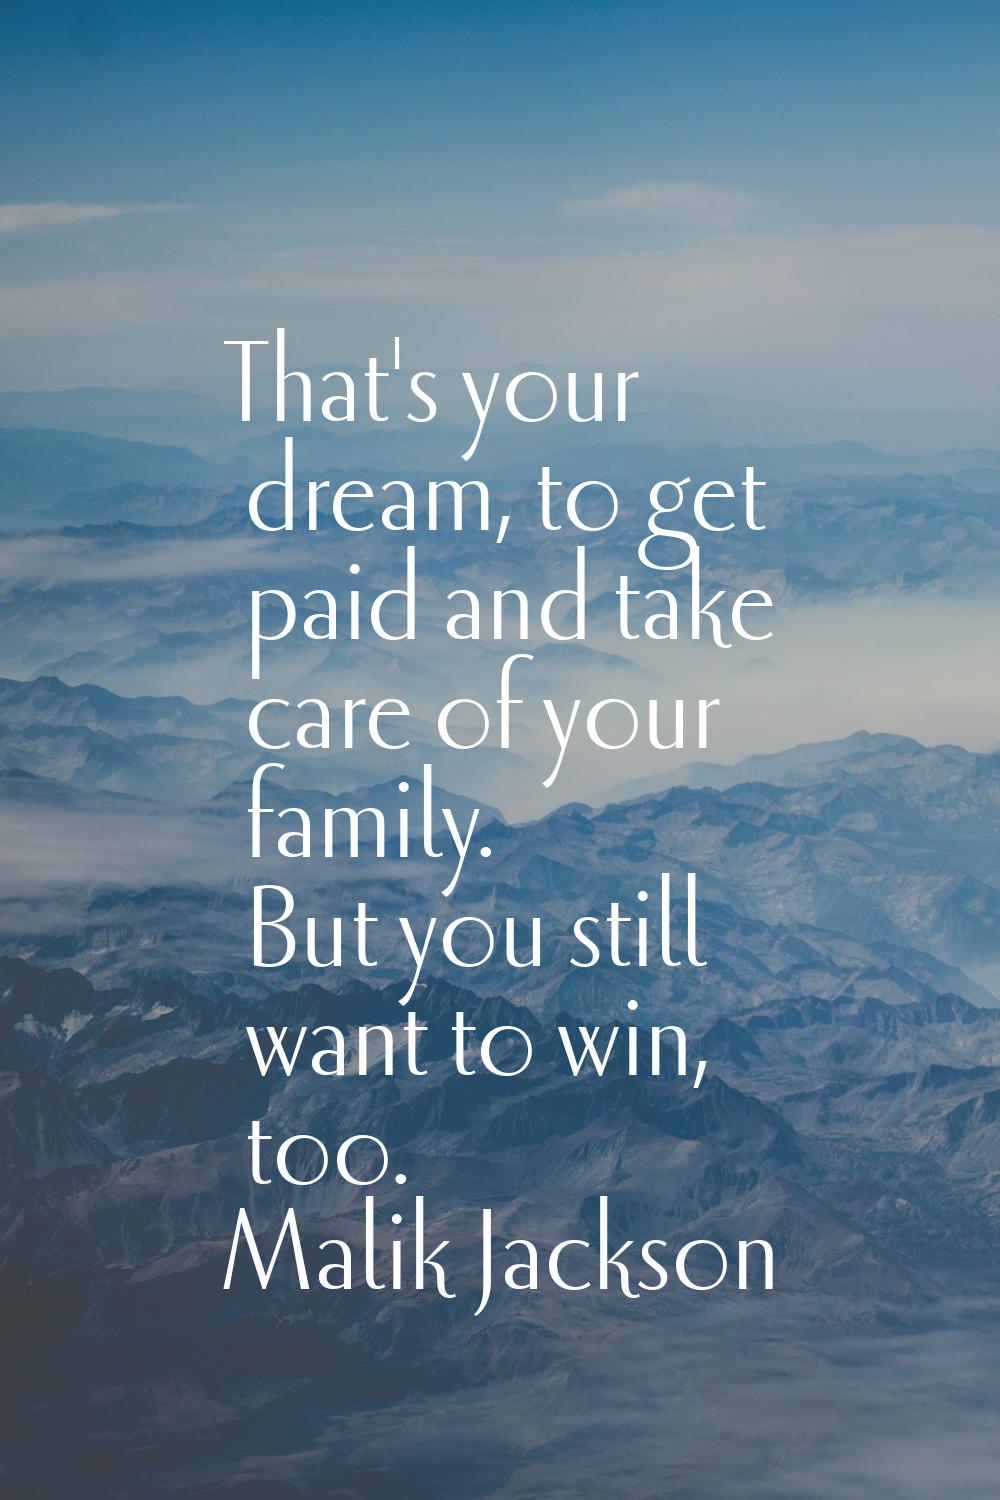 That's your dream, to get paid and take care of your family. But you still want to win, too.